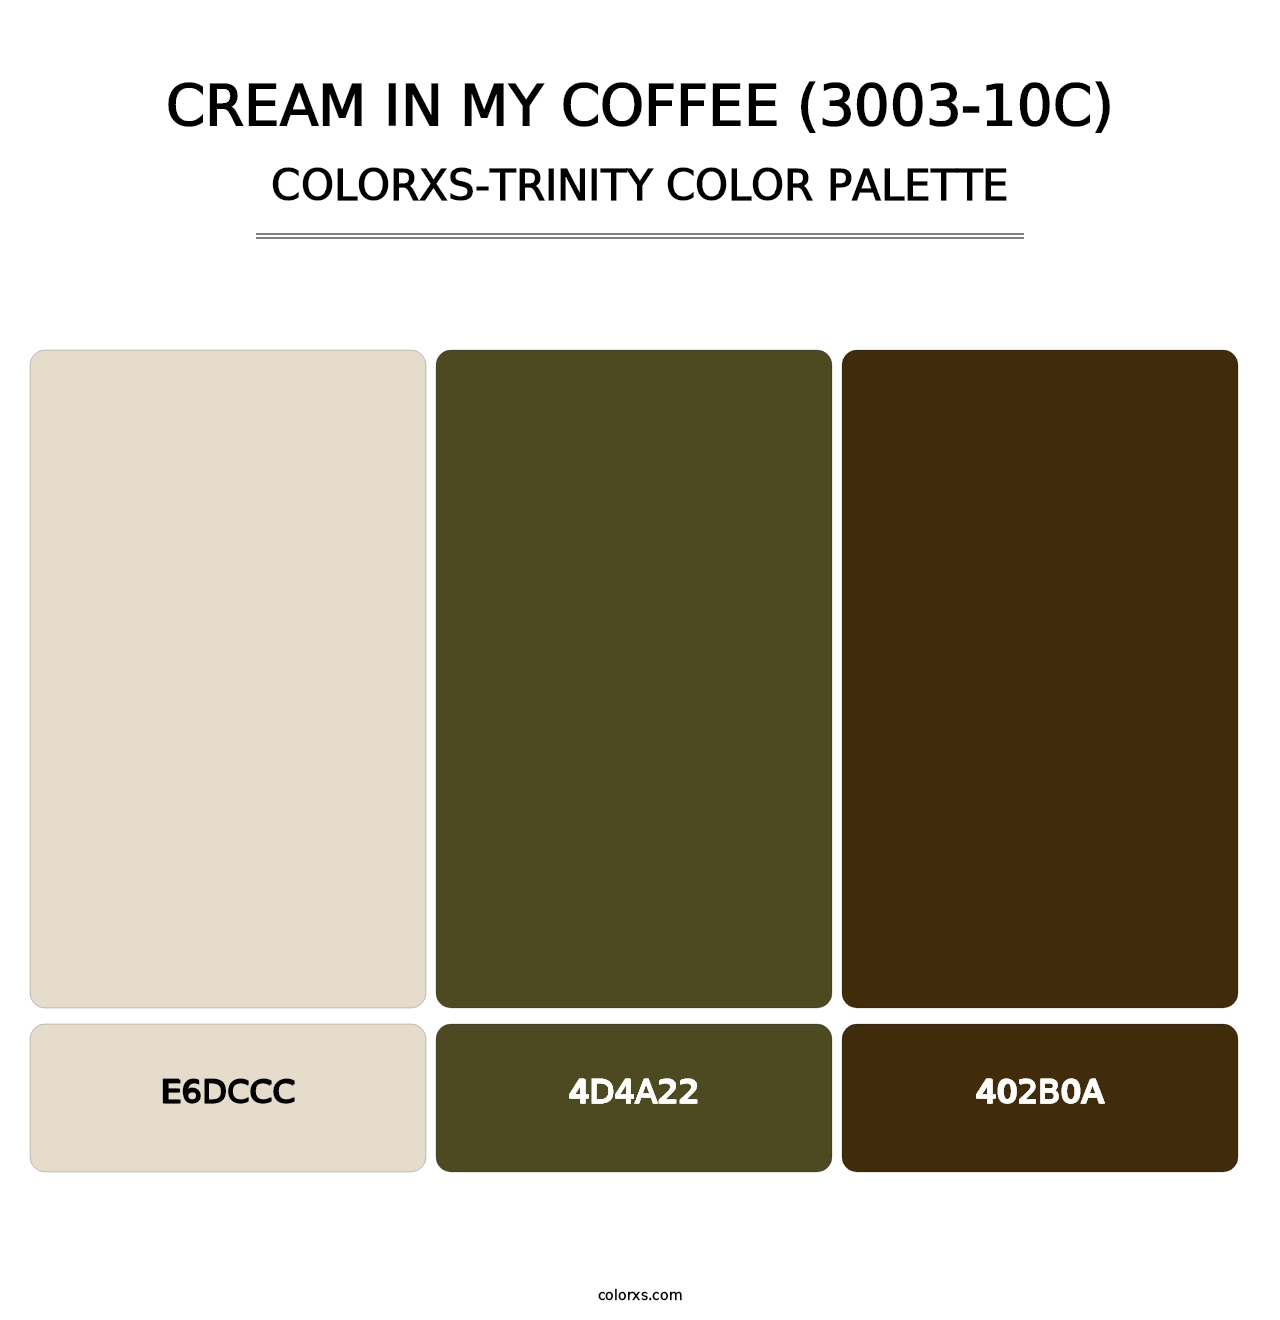 Cream in My Coffee (3003-10C) - Colorxs Trinity Palette